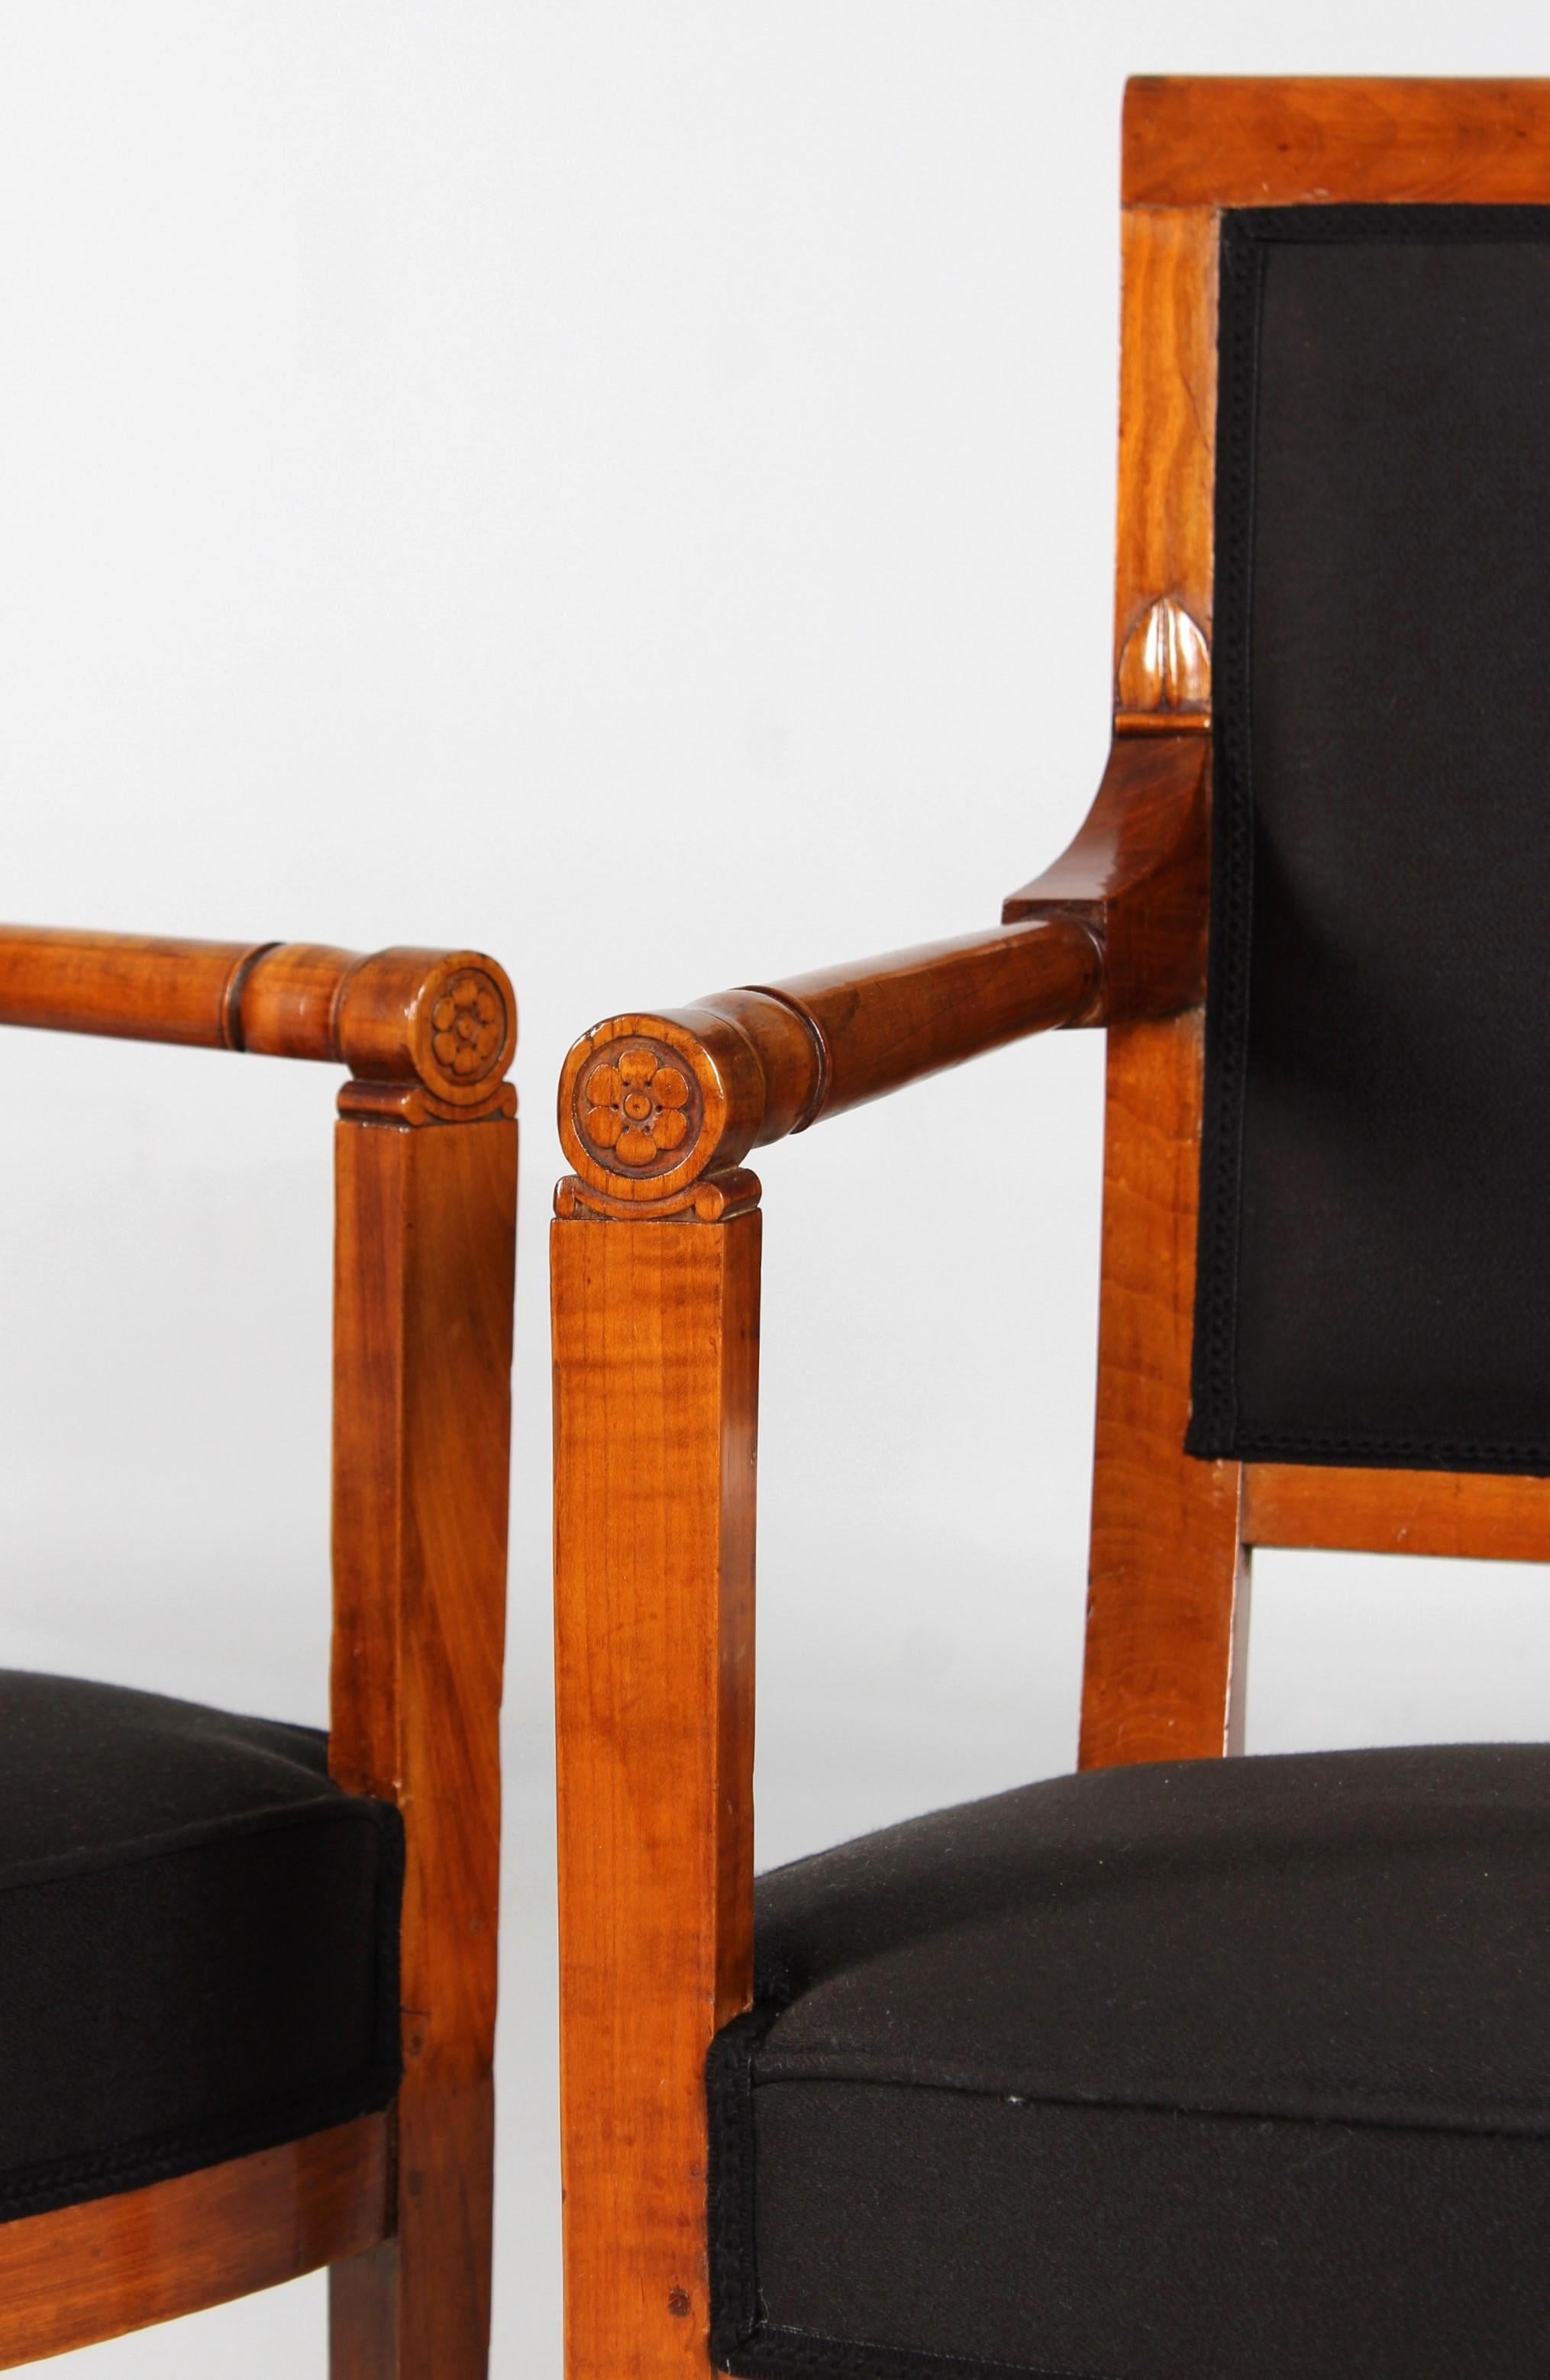 Pair of antique cherry armchairs

France
Cherry
Directoire around 1800

Dimensions: H x W x D: 87 x 58 x 49 cm, seat height: 43 cm

Description:
Pair of elegant and interestingly shaped armchairs made of solid cherry. The lines, straight in the